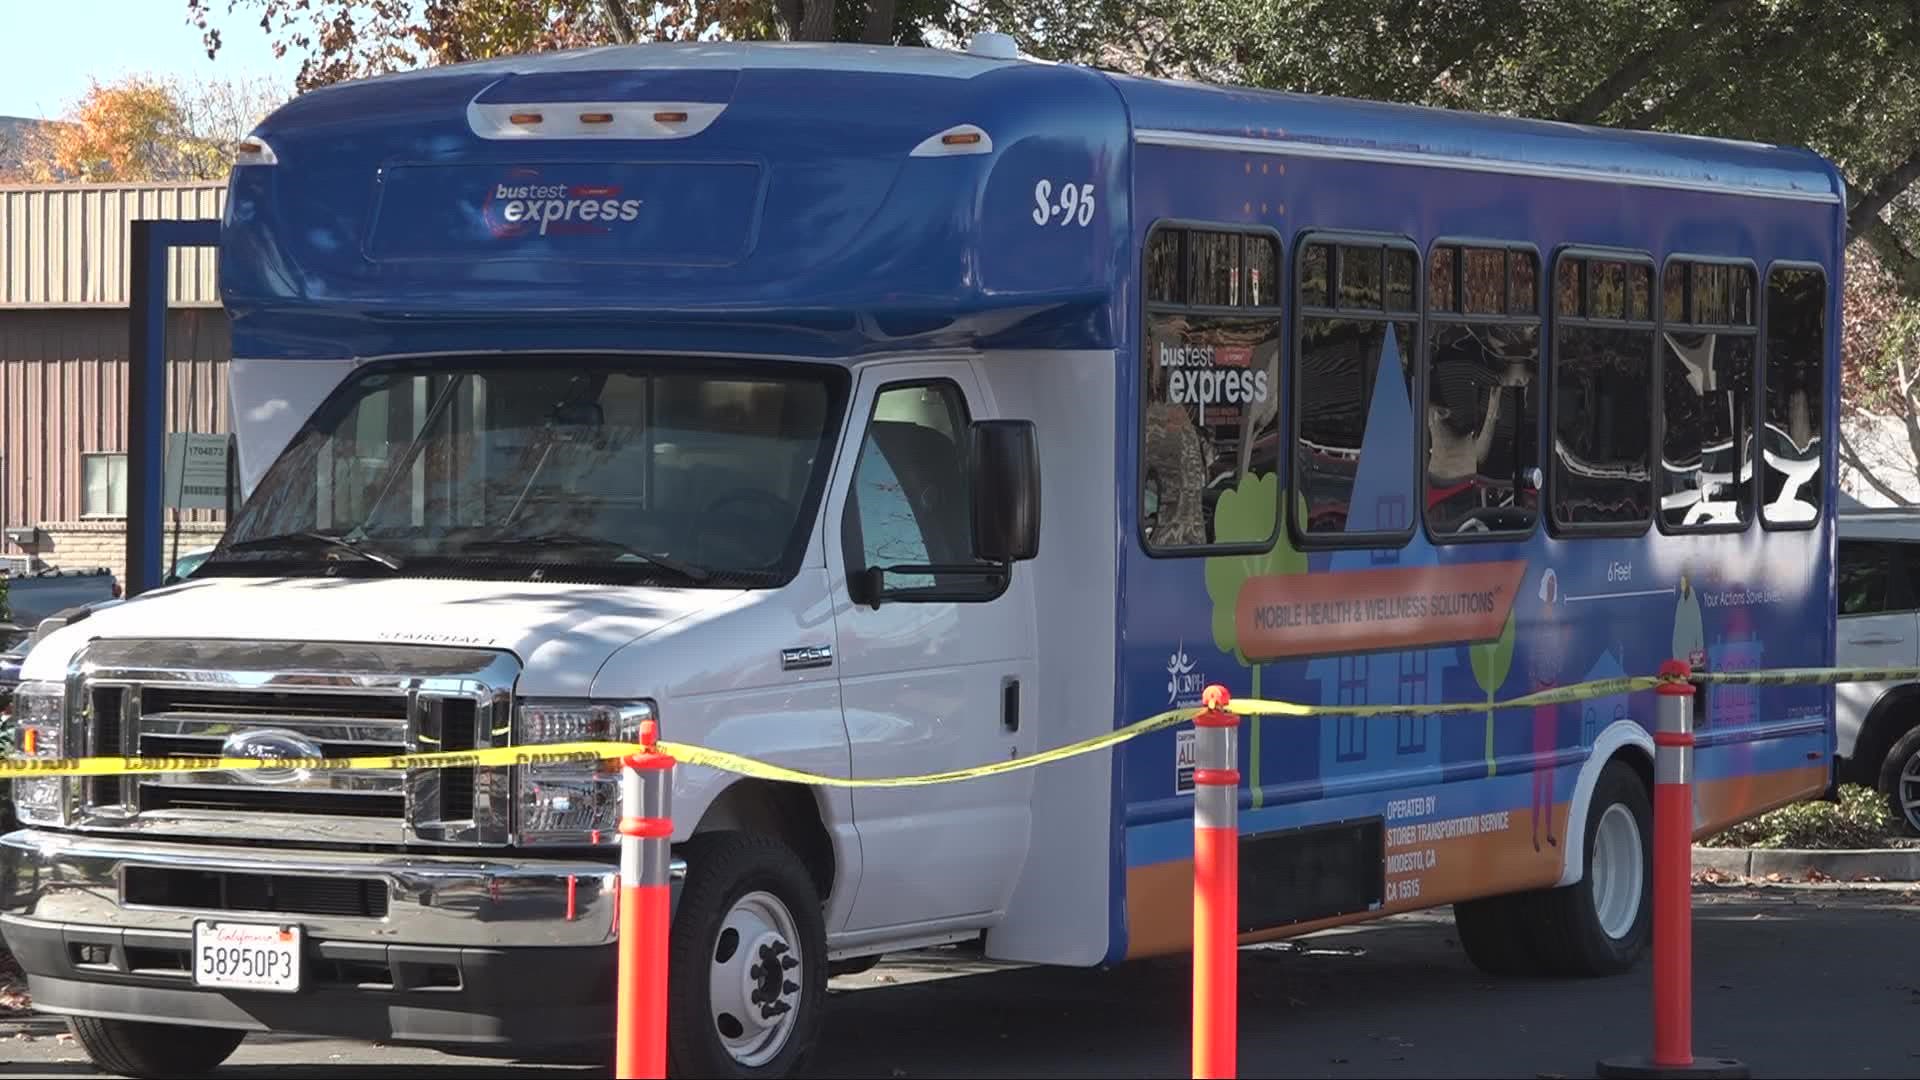 The state-funded mobile unit made its first appearance in West Sacramento on Tuesday in front of Yolo County Health and Human Services.